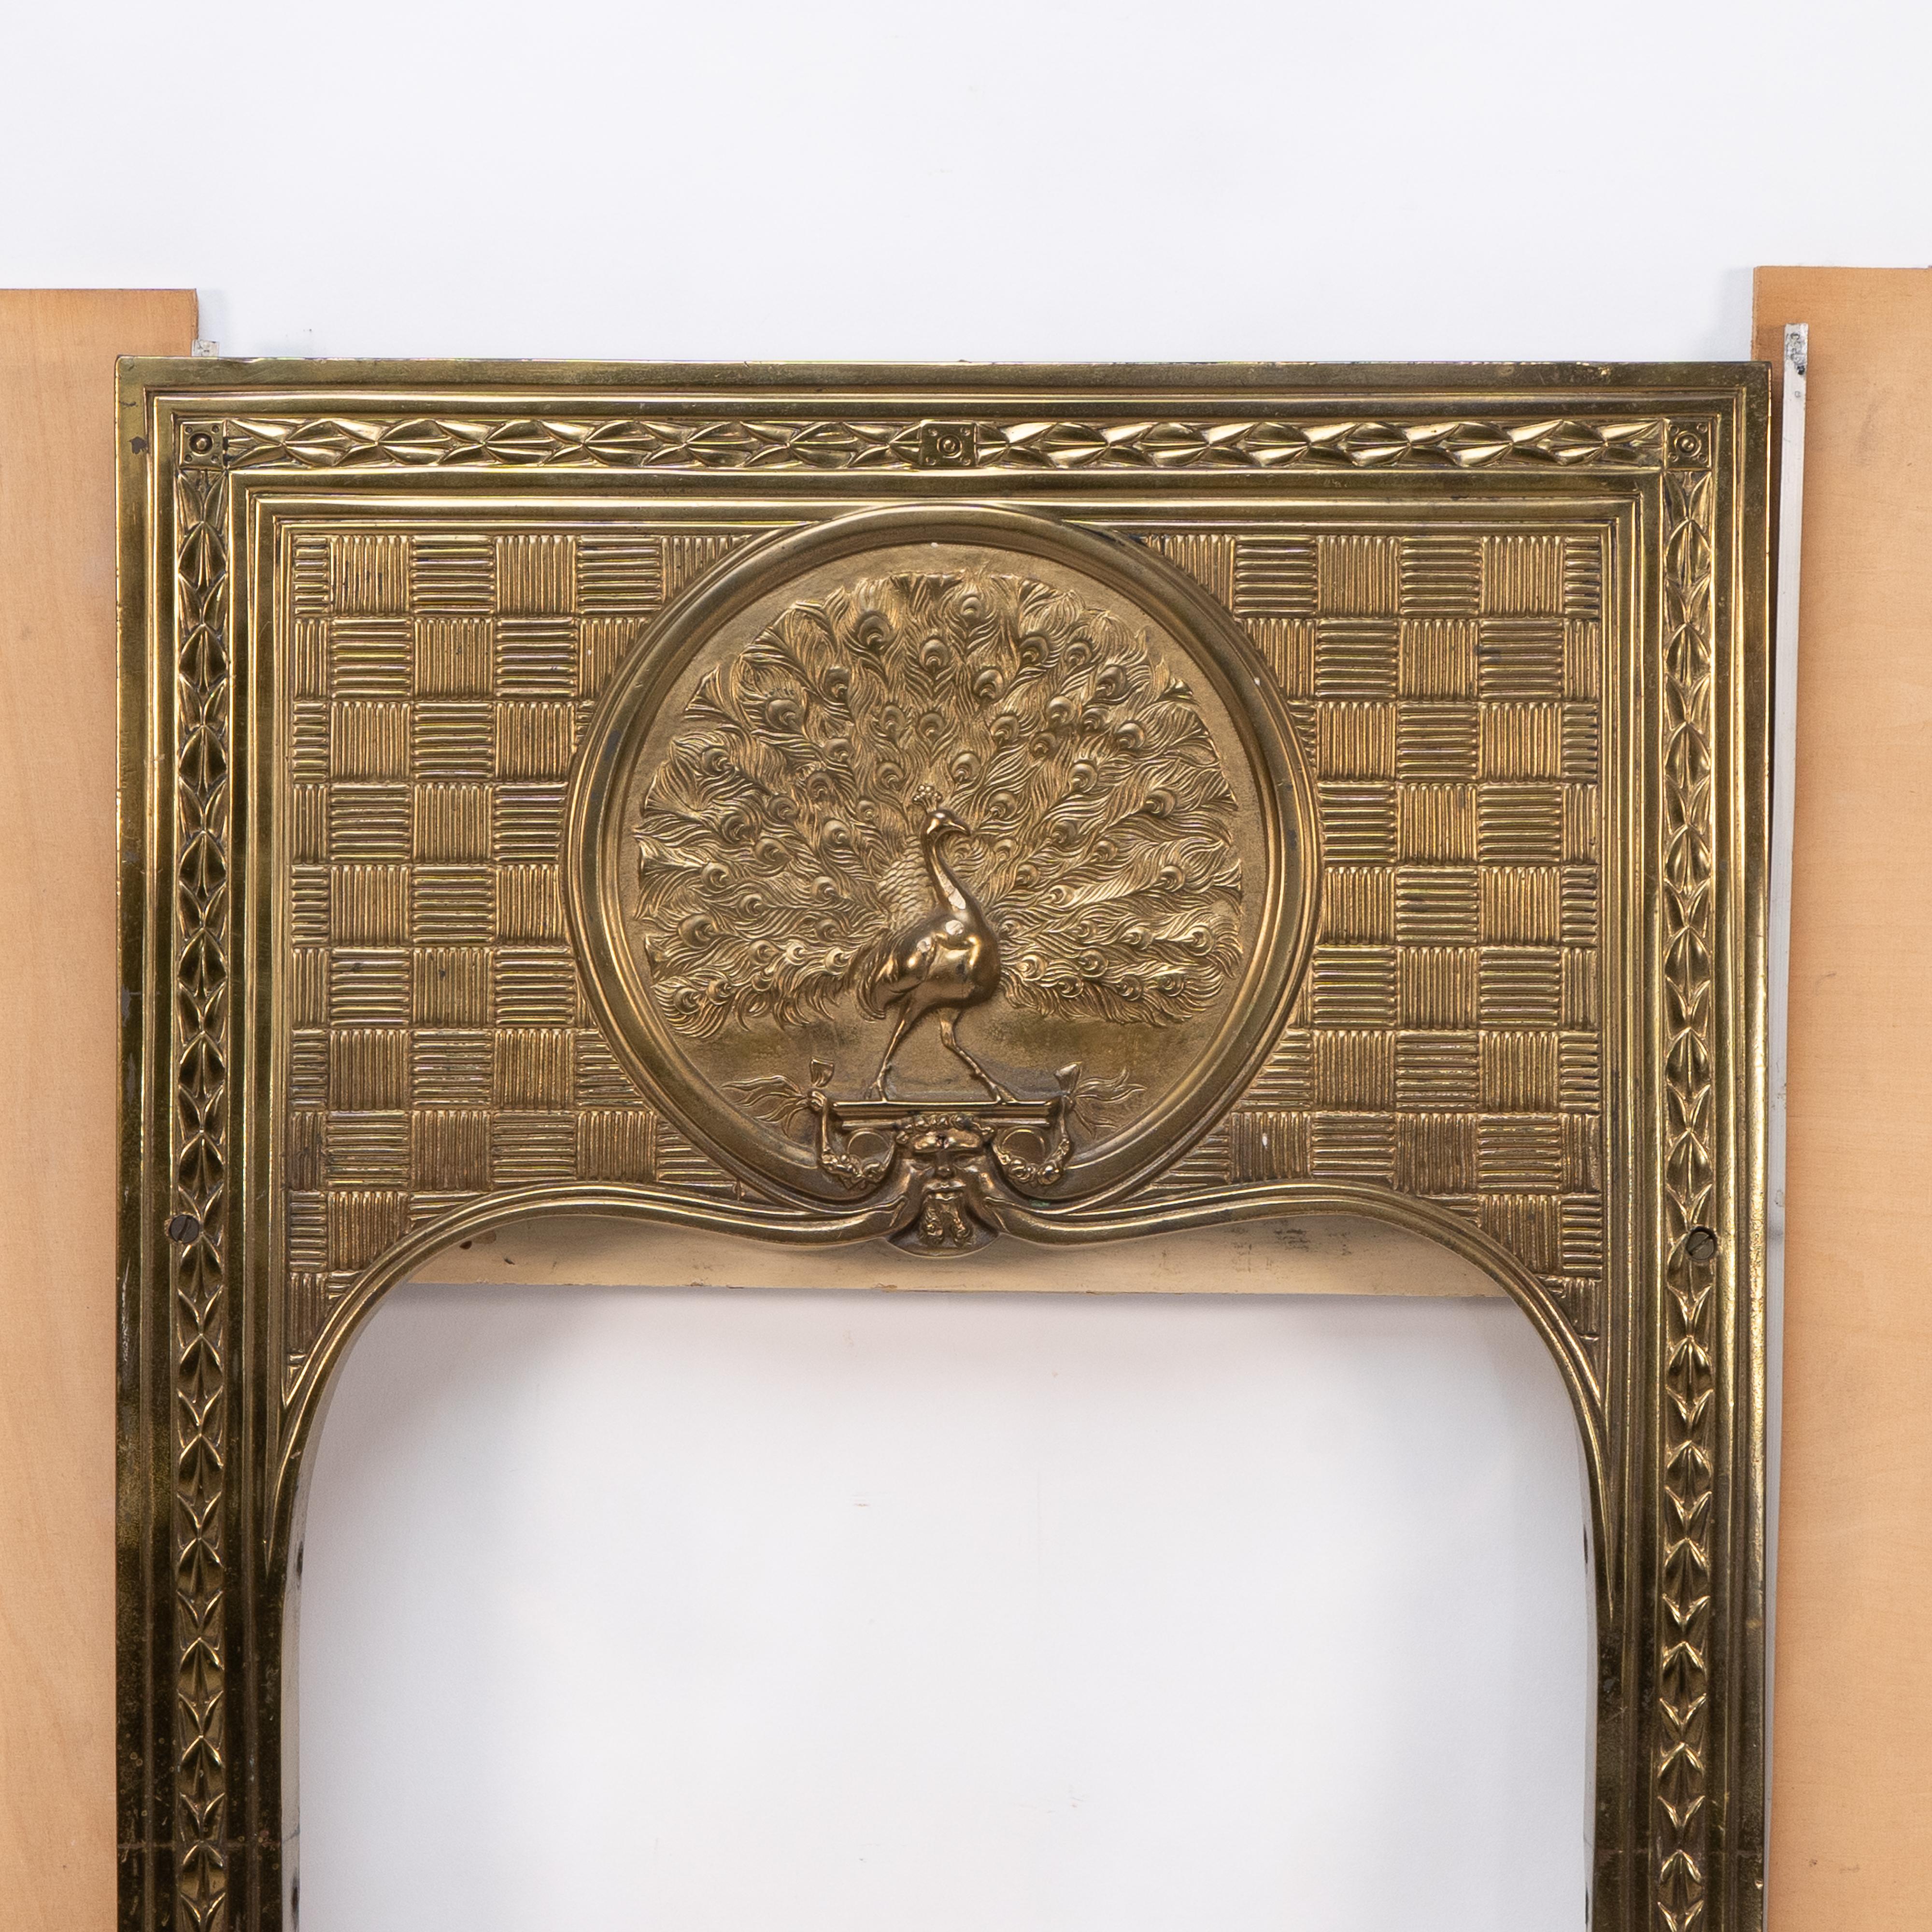 English T. Elsley attri. Aesthetic Movement brass fire insert w. upper central peacock For Sale